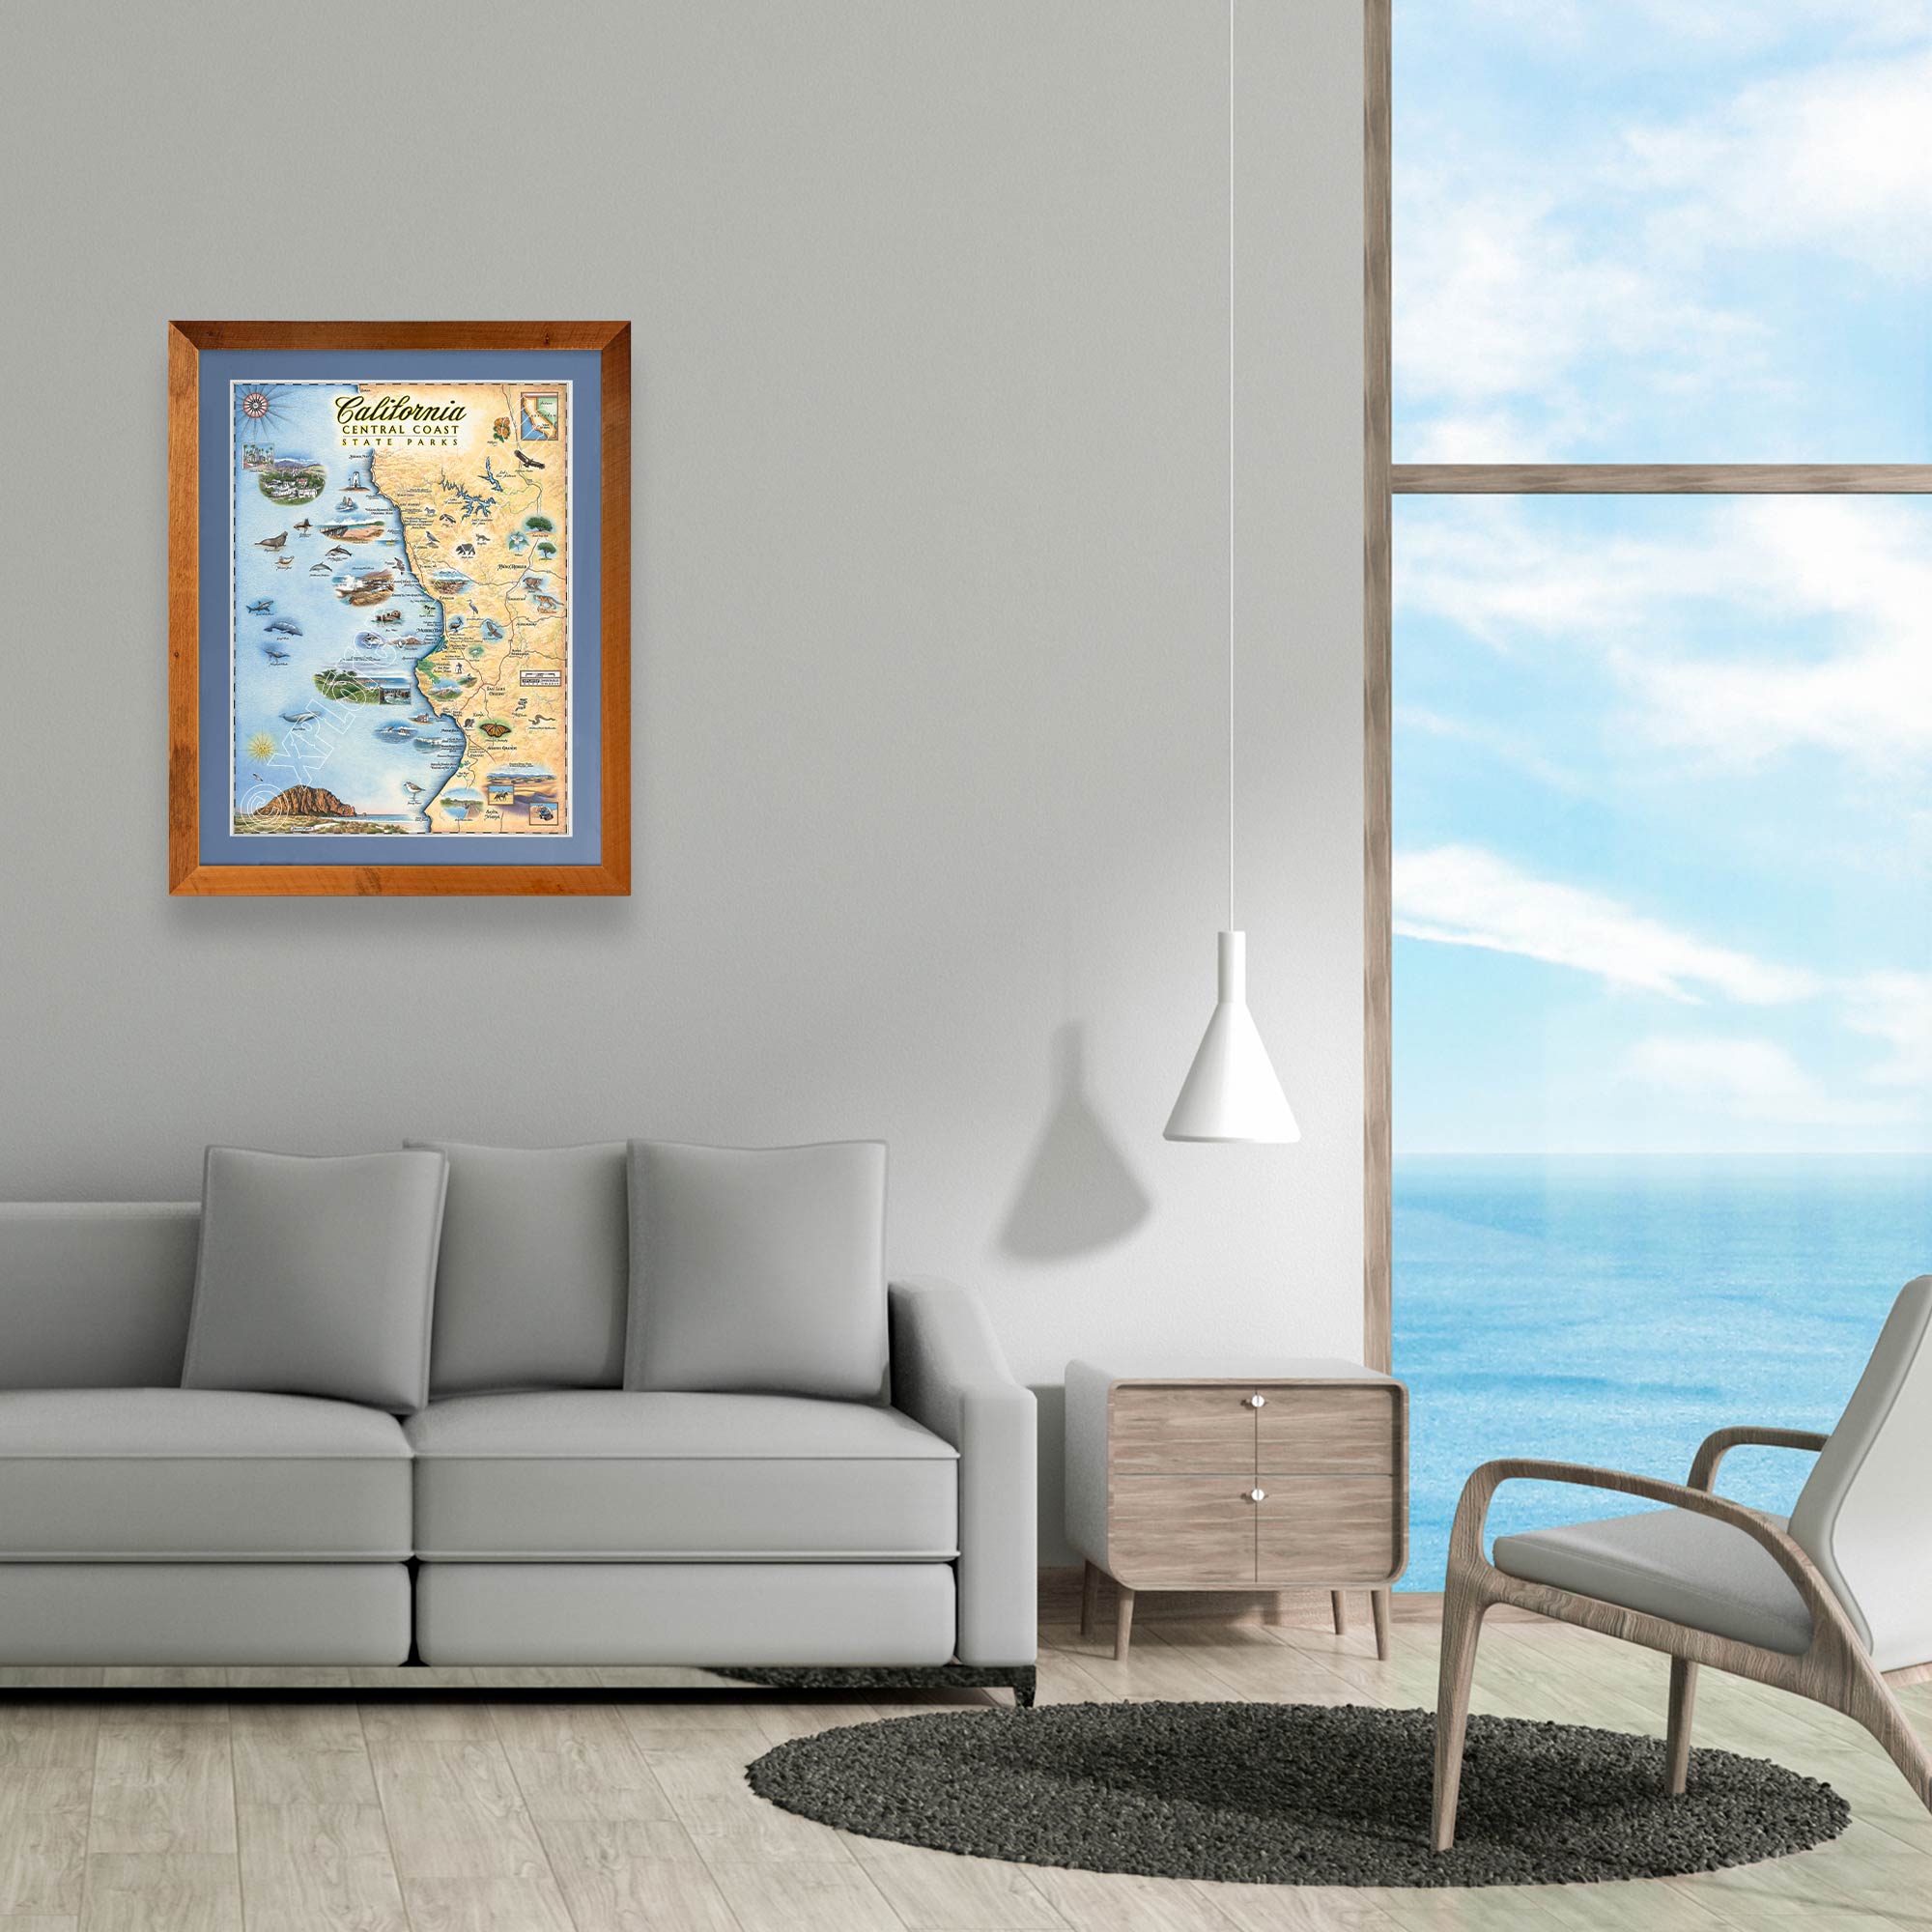 California Central Coast State Hand-Drawn Map framed in a Montana Flathead Lake reclaimed larch wood frame and blue mat. The map is hanging above a gray couch with ocean views.